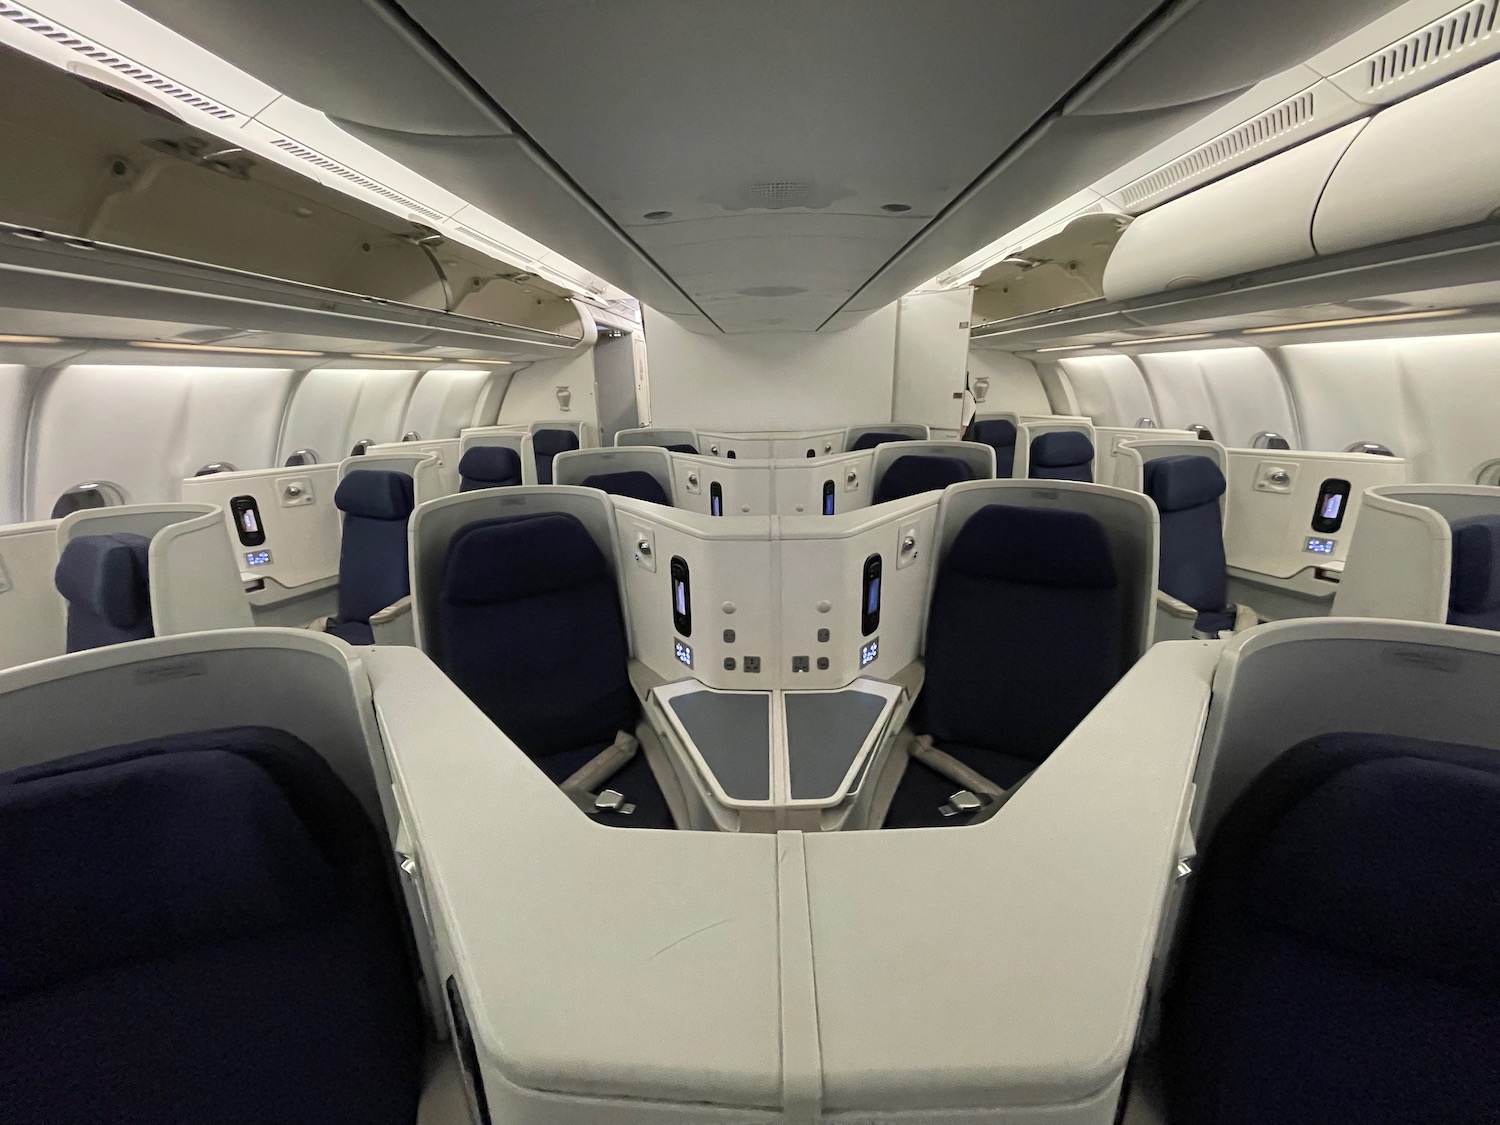 an airplane with seats and a few windows